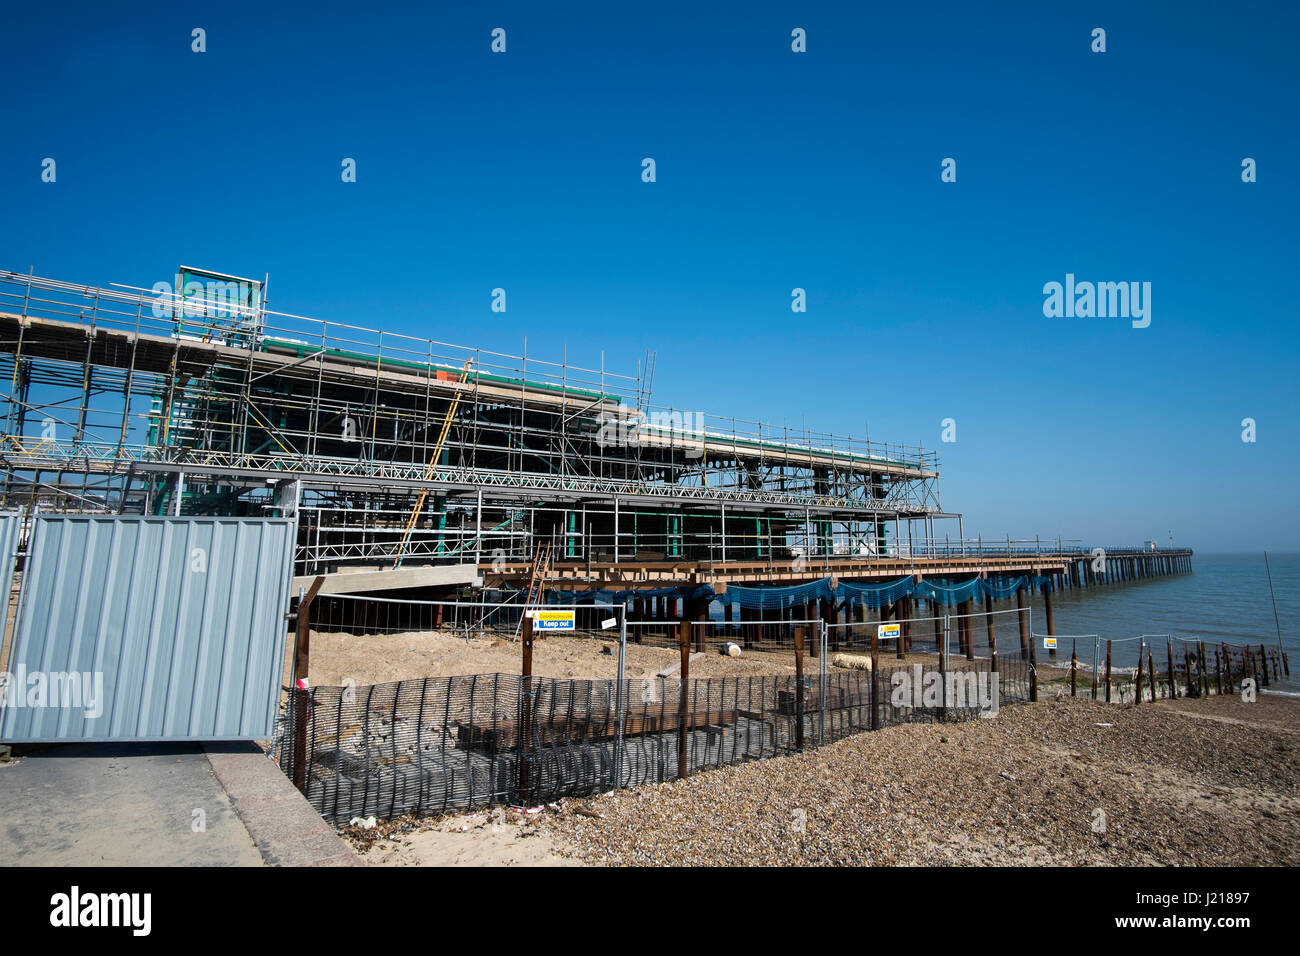 Building work being carried out on the pier in Felixstowe, Suffolk Stock Photo